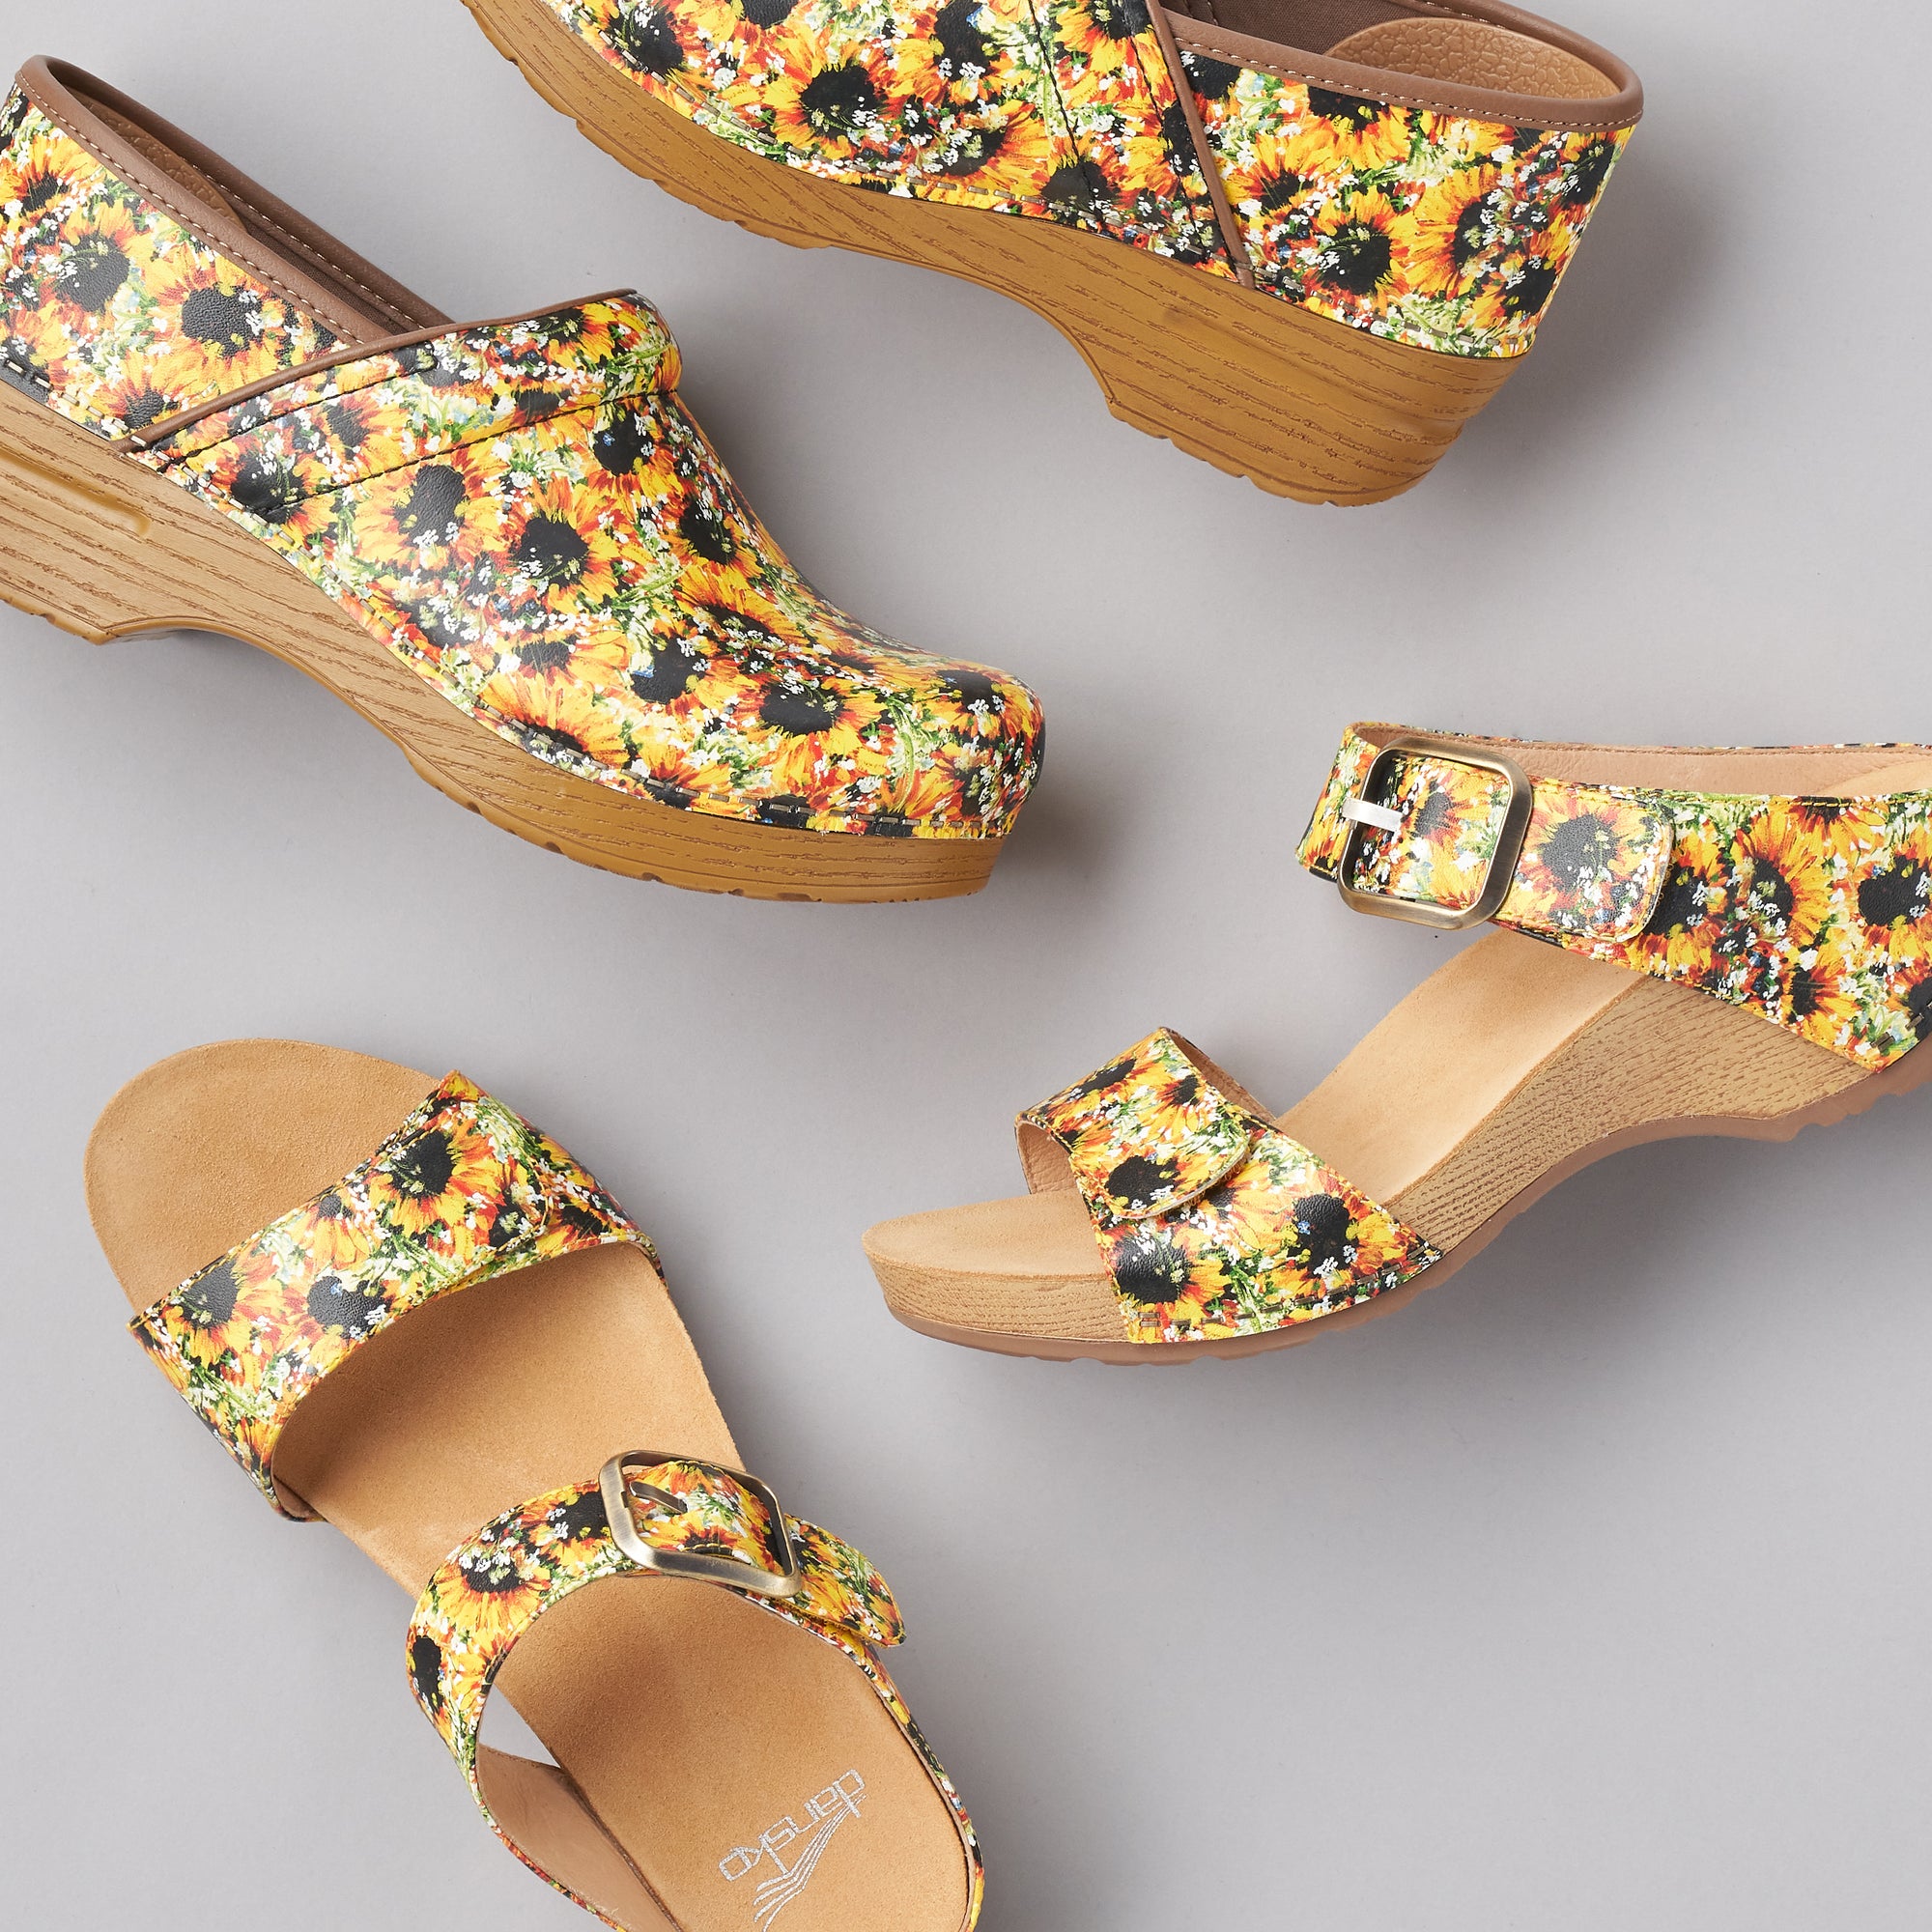 A sunflower printed collection of clog and sandal shown together.